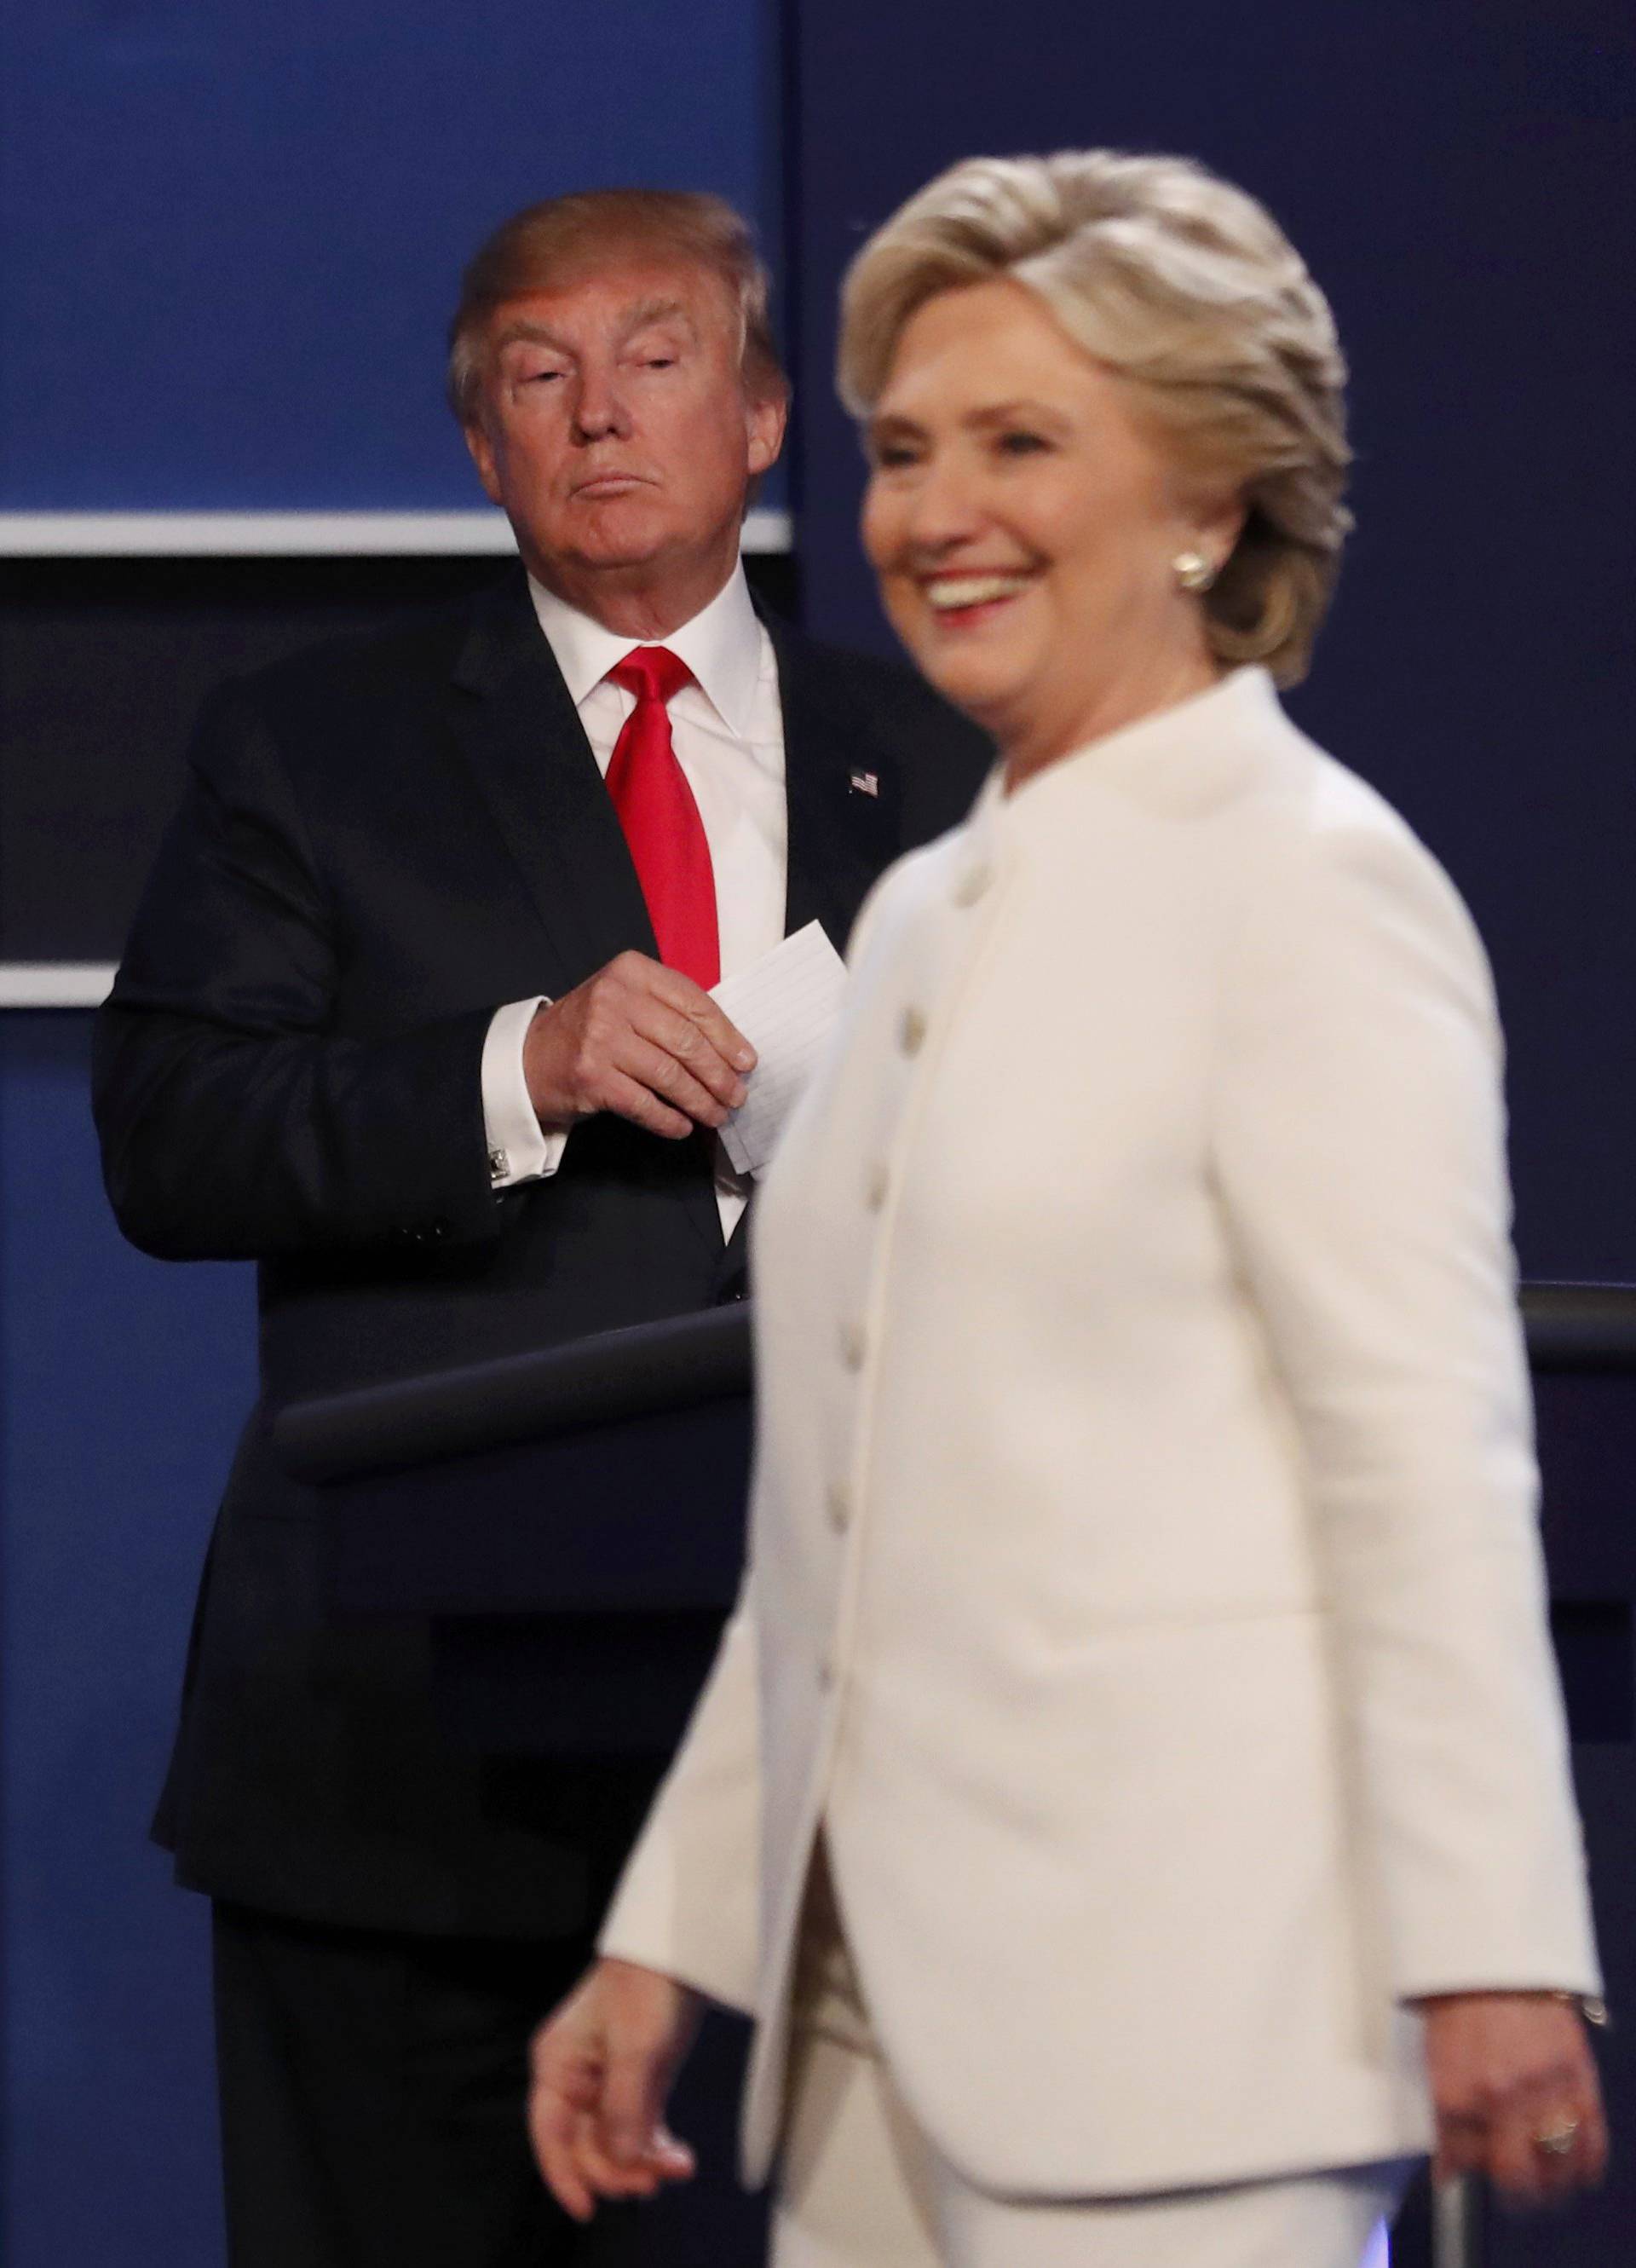 Republican U.S. presidential nominee Donald Trump and Democratic U.S. presidential nominee Hillary Clinton finish their third and final 2016 presidential campaign debate at UNLV in Las Vegas